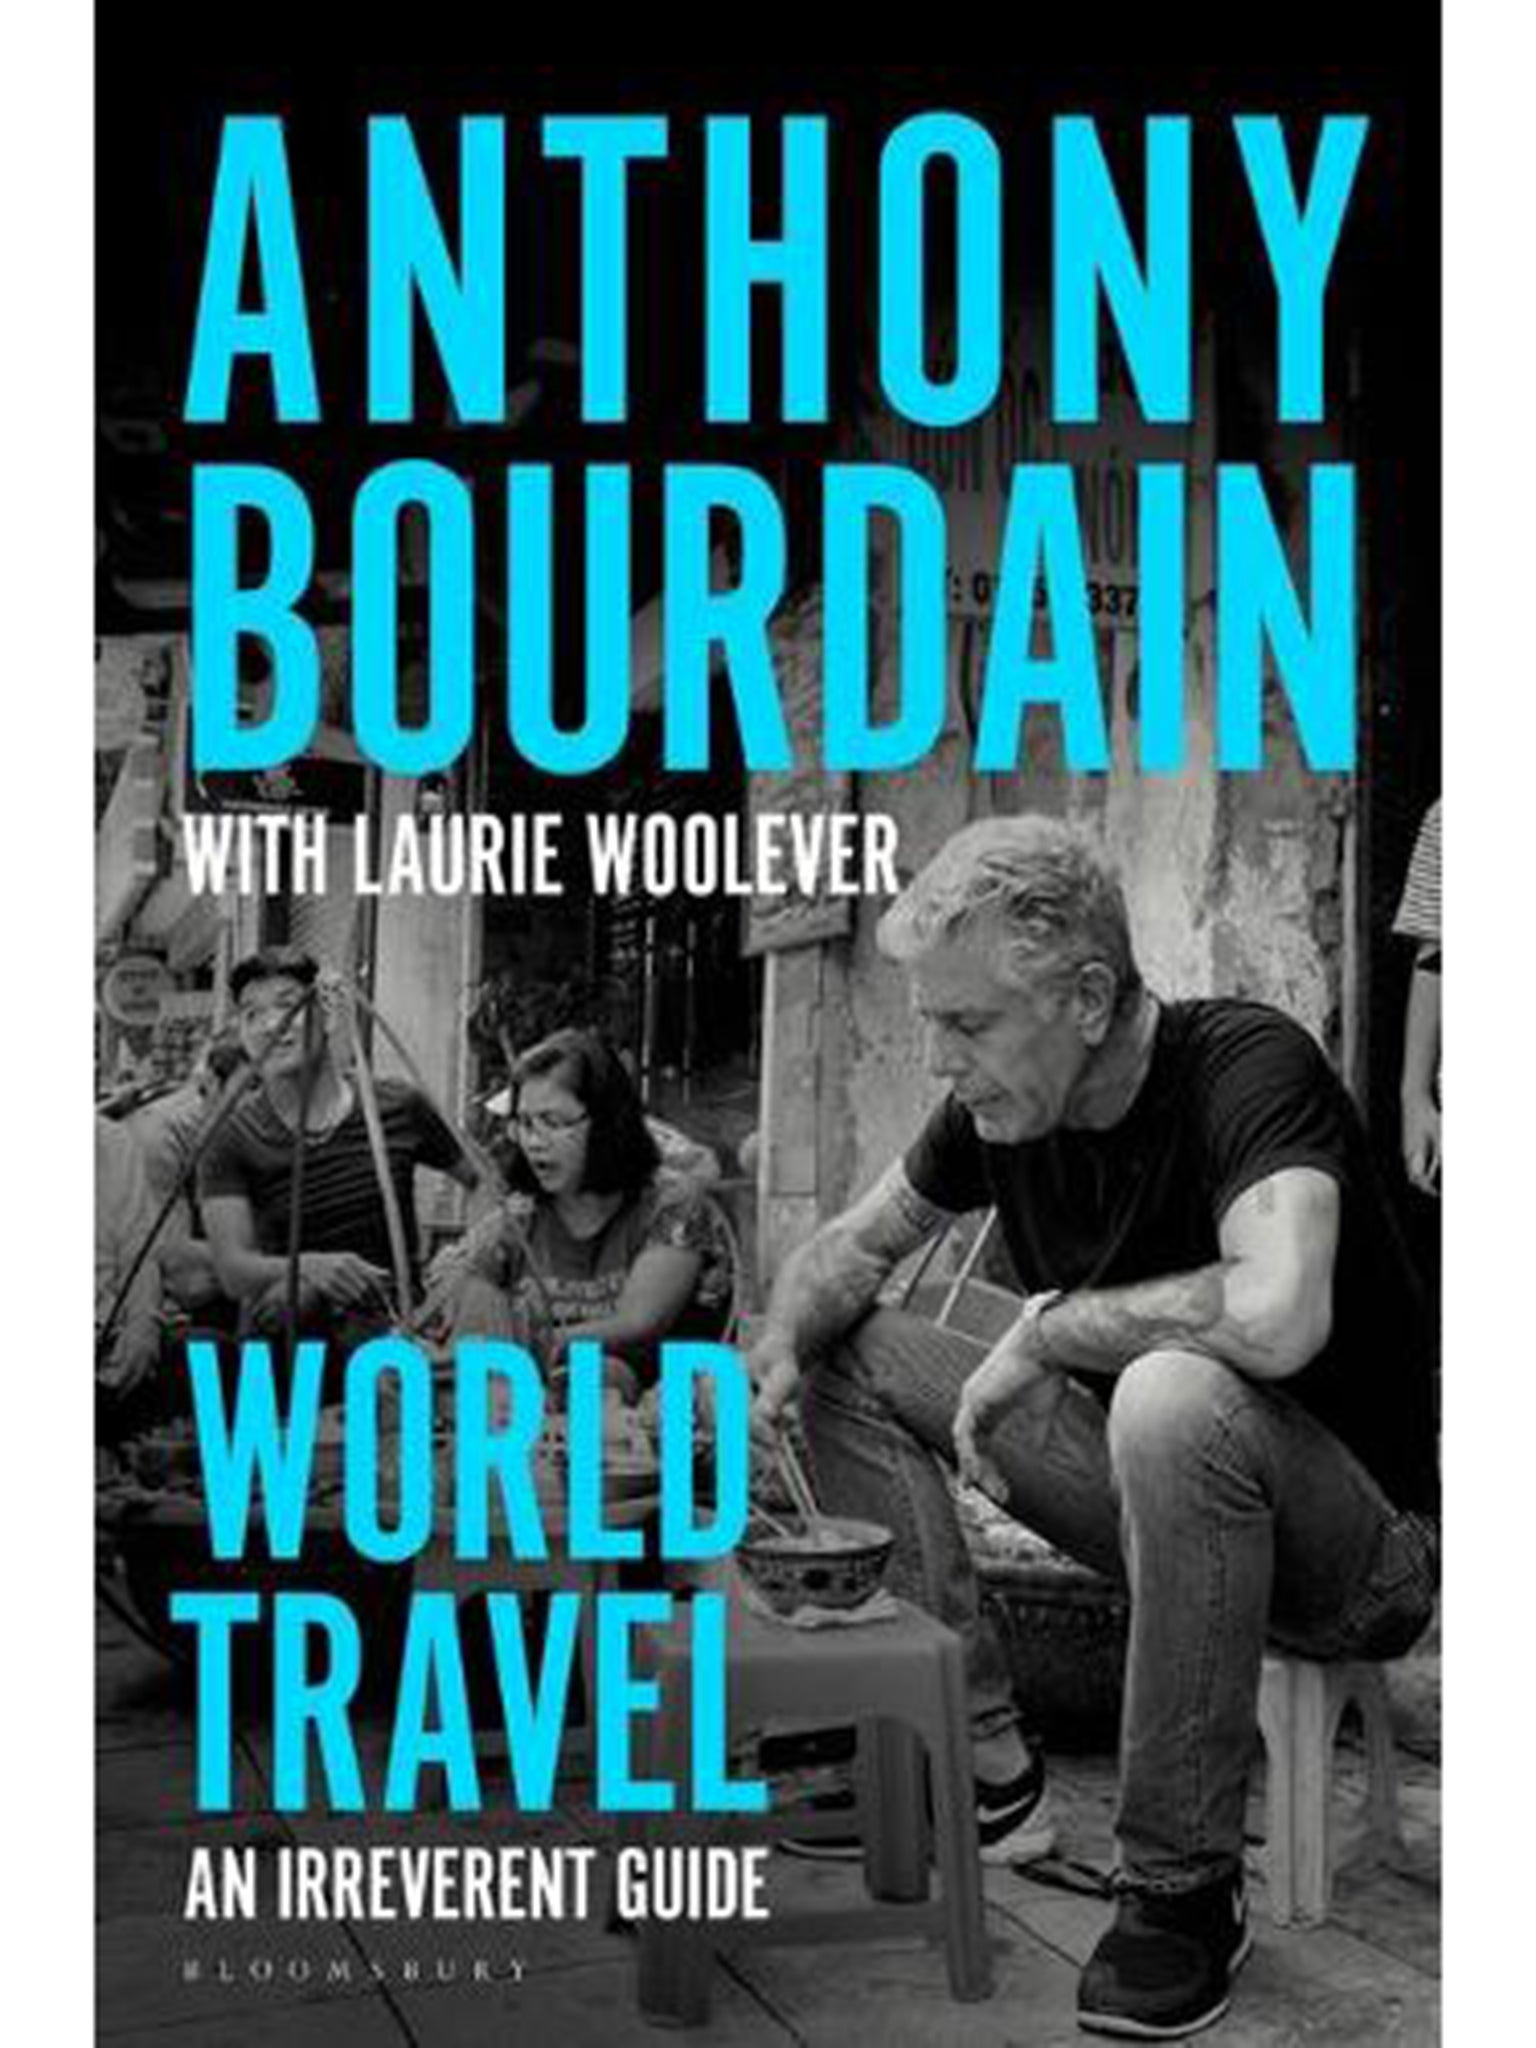 ‘World Travel: An Irreverent Guide’ will be released on 20 April